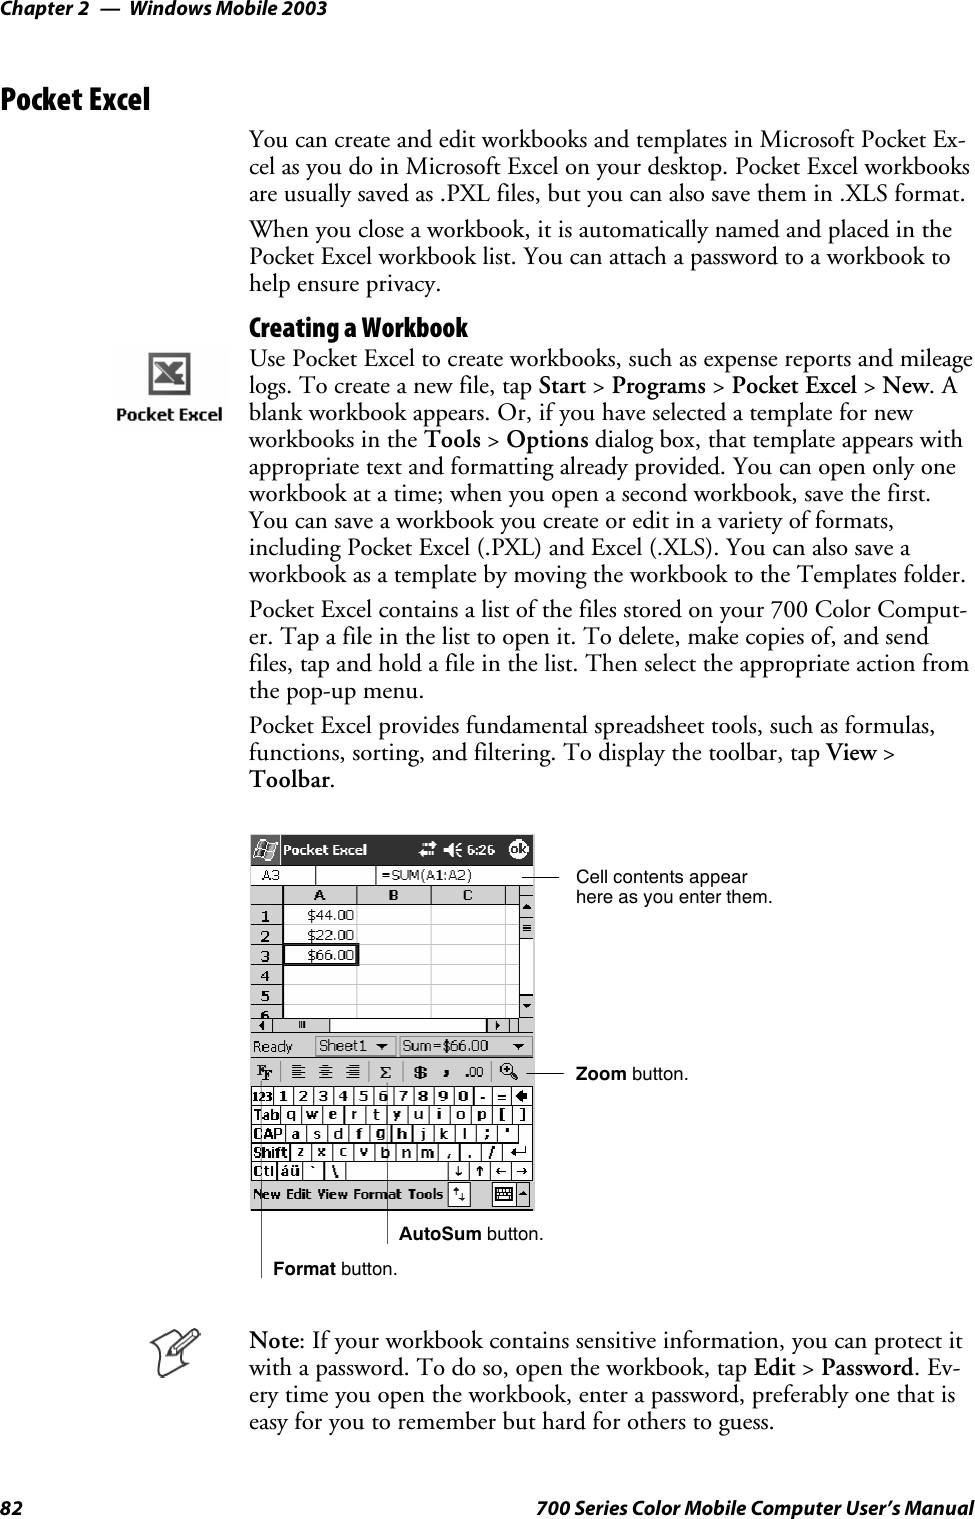 Windows Mobile 2003Chapter —282 700 Series Color Mobile Computer User’s ManualPocket ExcelYou can create and edit workbooks and templates in Microsoft Pocket Ex-cel as you do in Microsoft Excel on your desktop. Pocket Excel workbooksare usually saved as .PXL files, but you can also save them in .XLS format.When you close a workbook, it is automatically named and placed in thePocket Excel workbook list. You can attach a password to a workbook tohelp ensure privacy.Creating a WorkbookUse Pocket Excel to create workbooks, such as expense reports and mileagelogs. To create a new file, tap Start &gt;Programs &gt;Pocket Excel &gt;New.Ablank workbook appears. Or, if you have selected a template for newworkbooks in the Tools &gt;Options dialog box, that template appears withappropriate text and formatting already provided. You can open only oneworkbook at a time; when you open a second workbook, save the first.You can save a workbook you create or edit in a variety of formats,including Pocket Excel (.PXL) and Excel (.XLS). You can also save aworkbook as a template by moving the workbook to the Templates folder.Pocket Excel contains a list of the files stored on your 700 Color Comput-er. Tap a file in the list to open it. To delete, make copies of, and sendfiles, tap and hold a file in the list. Then select the appropriate action fromthe pop-up menu.Pocket Excel provides fundamental spreadsheet tools, such as formulas,functions, sorting, and filtering. To display the toolbar, tap View &gt;Toolbar.Zoom button.Format button.AutoSum button.Cell contents appearhere as you enter them.Note: If your workbook contains sensitive information, you can protect itwith a password. To do so, open the workbook, tap Edit &gt;Password.Ev-ery time you open the workbook, enter a password, preferably one that iseasy for you to remember but hard for others to guess.